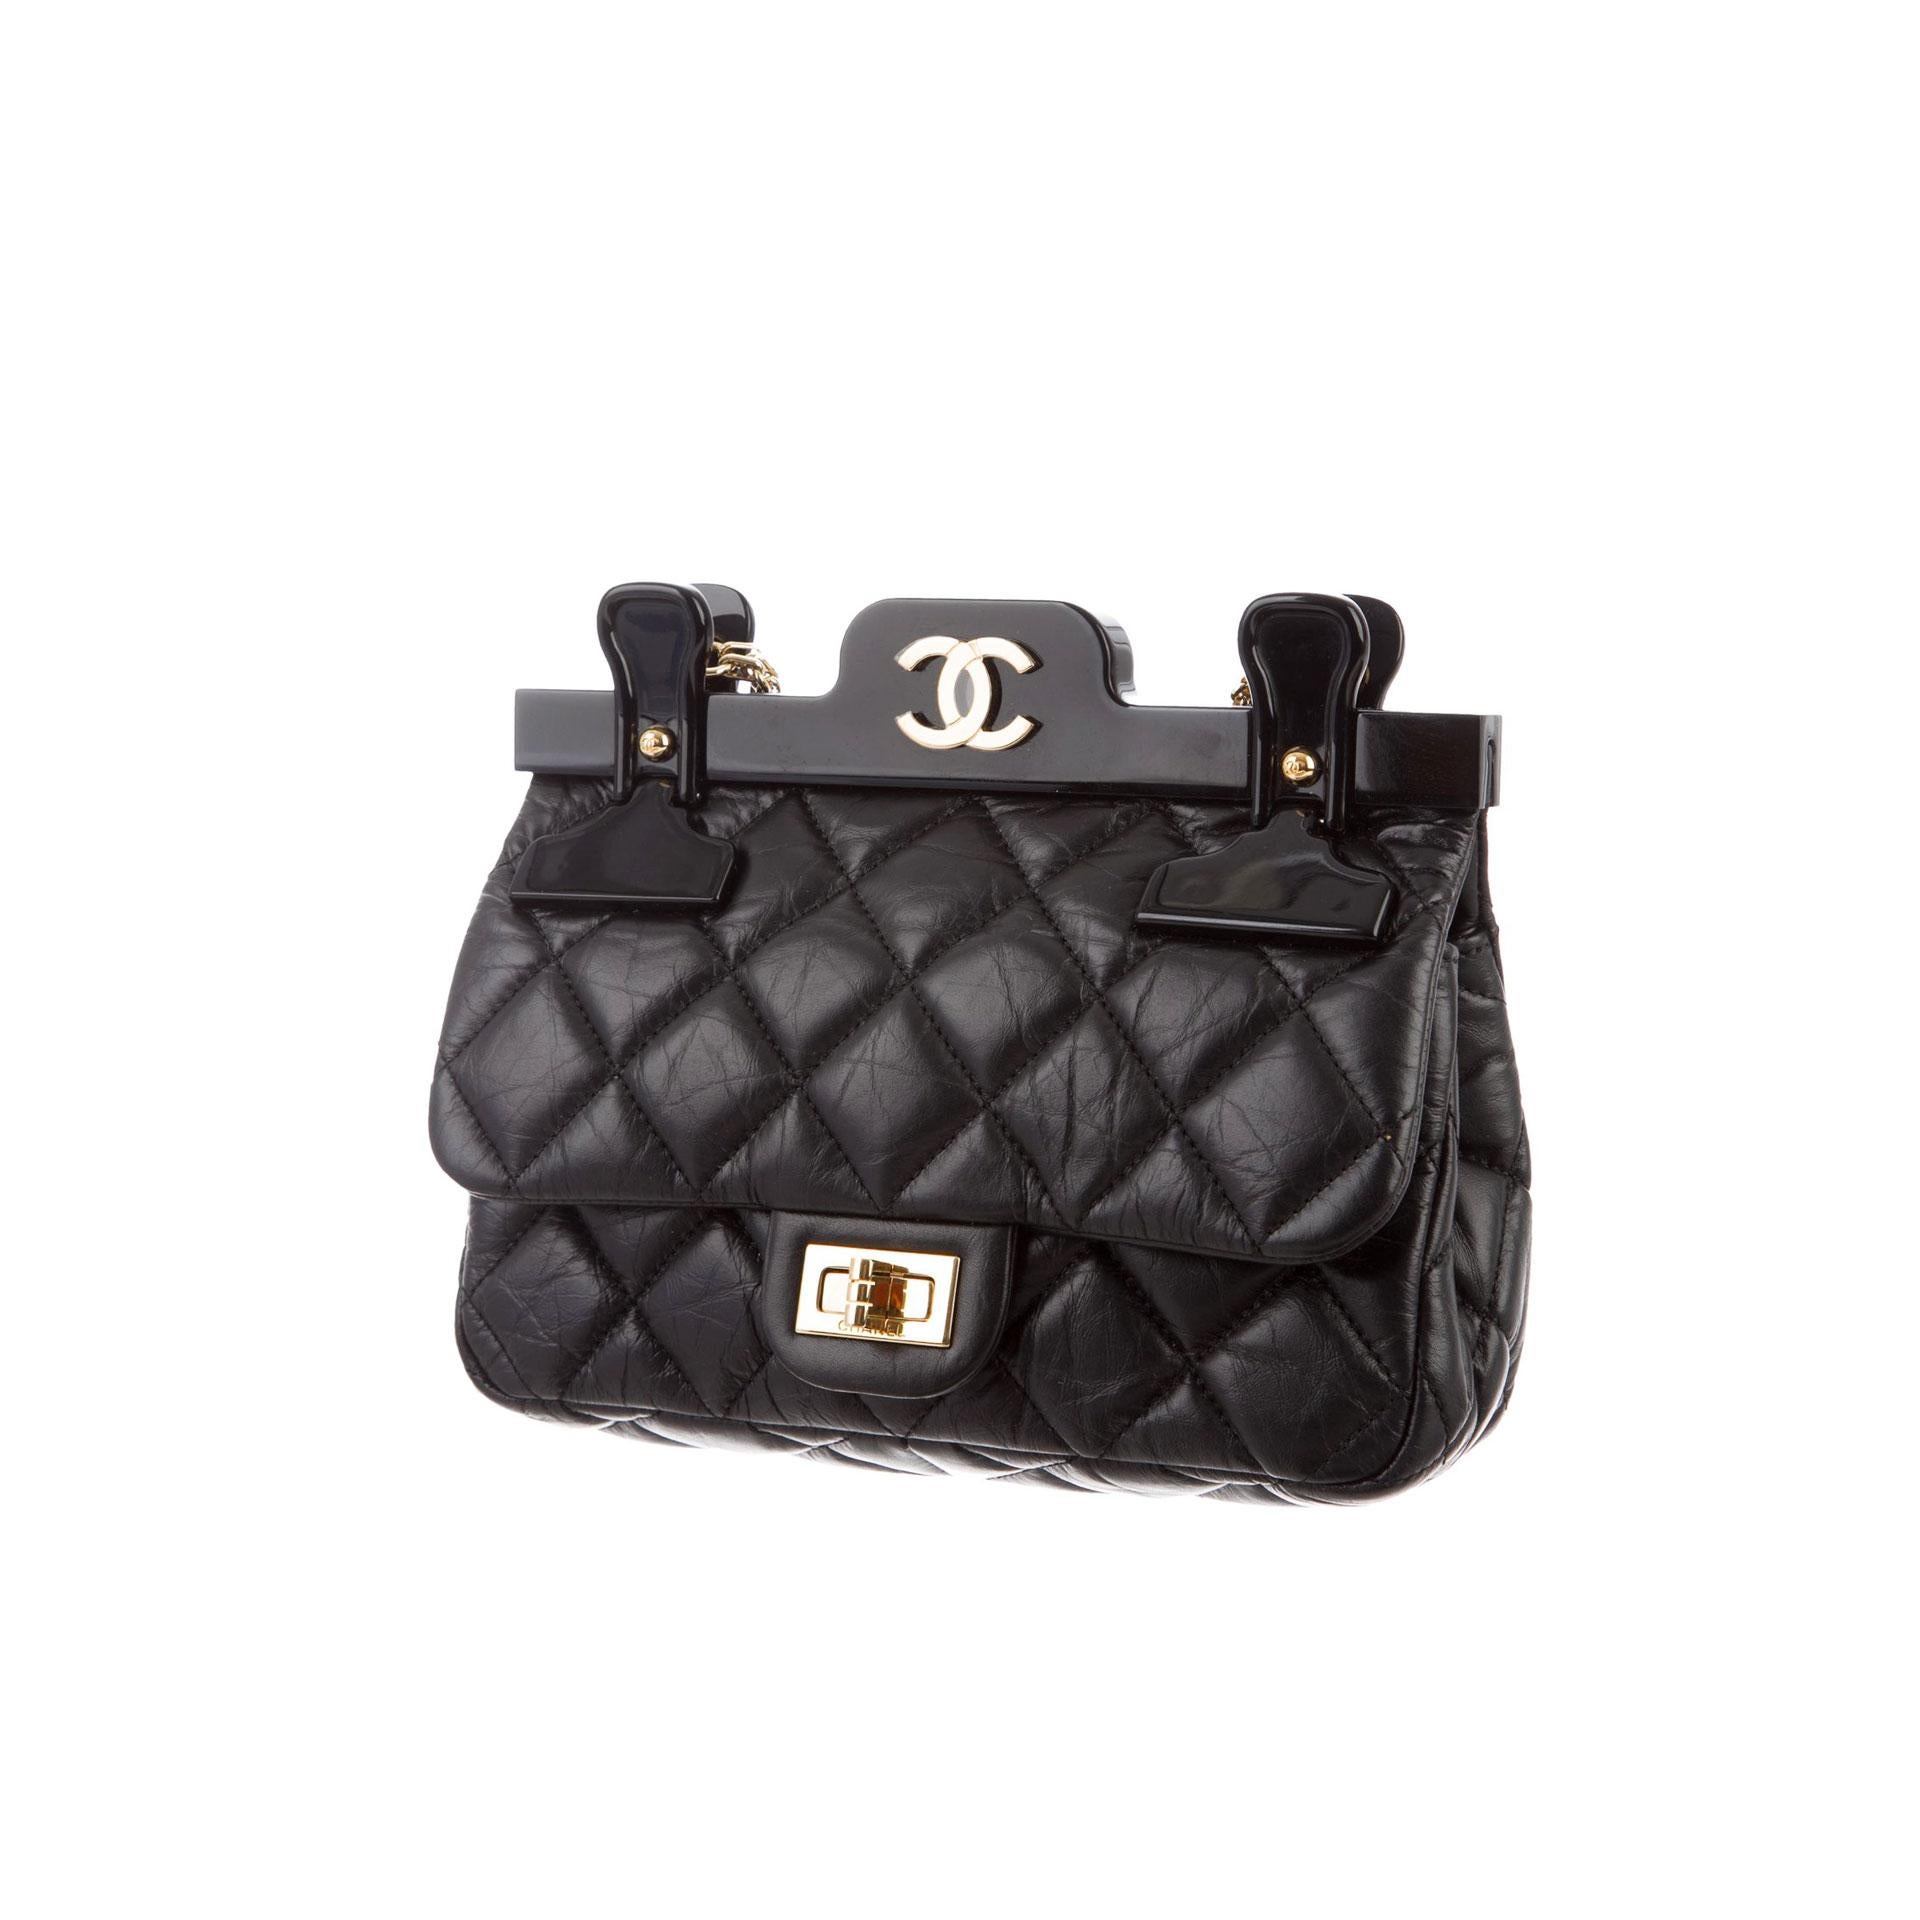 Chanel Classic Flap Hanger Small 2.55 Reissue Bag Limited Edition

2016
Gold tone hardware
Mademoiselle turn-lock closure
Black calfskin
Reissue classic chain
Hanger detail with rear mirror
Classic back pocket
Burgundy leather interior

8